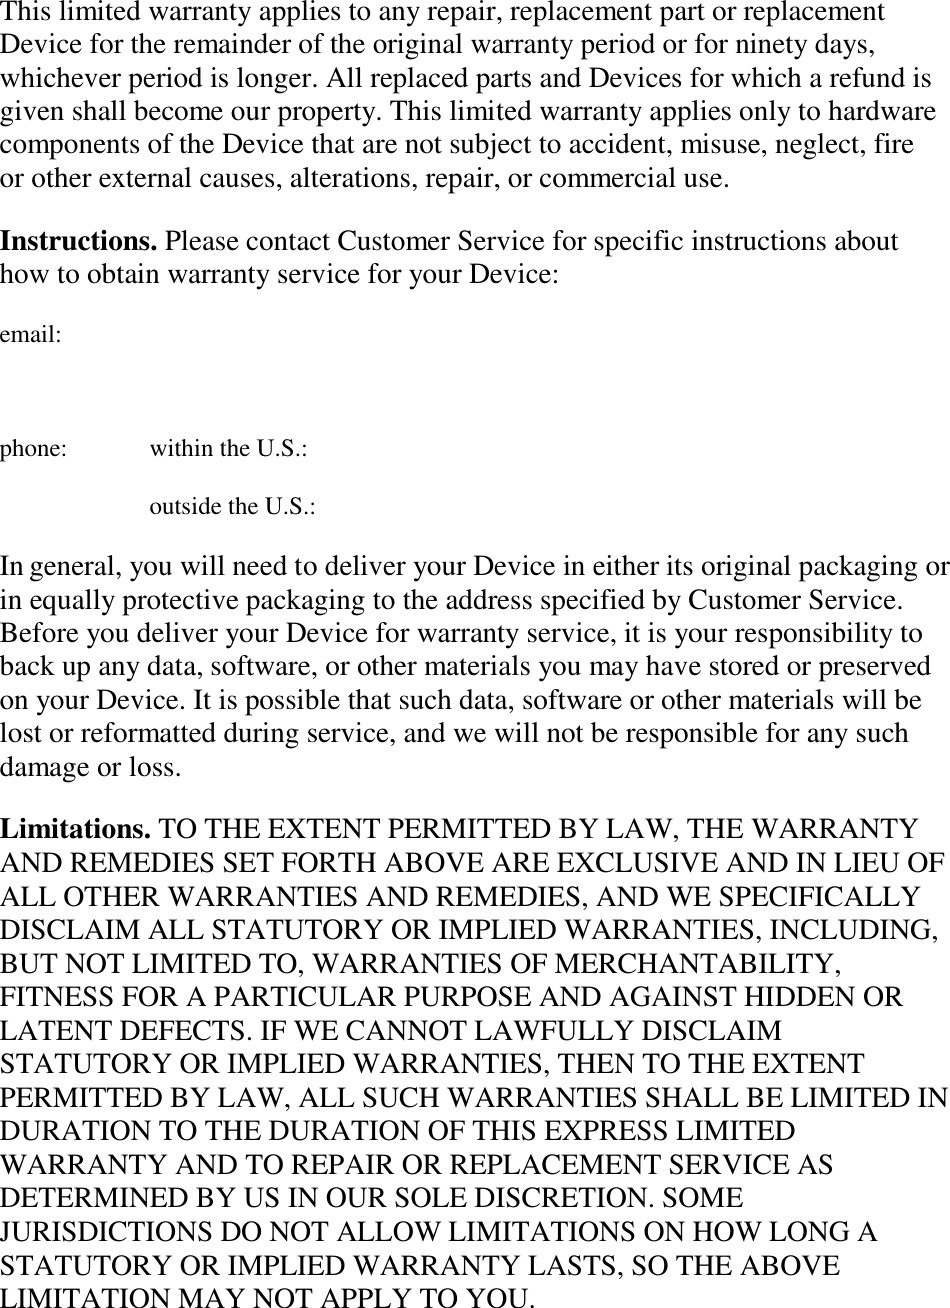   This limited warranty applies to any repair, replacement part or replacement Device for the remainder of the original warranty period or for ninety days, whichever period is longer. All replaced parts and Devices for which a refund is given shall become our property. This limited warranty applies only to hardware components of the Device that are not subject to accident, misuse, neglect, fire or other external causes, alterations, repair, or commercial use. Instructions. Please contact Customer Service for specific instructions about how to obtain warranty service for your Device: email:  phone:  within the U.S.: outside the U.S.: In general, you will need to deliver your Device in either its original packaging or in equally protective packaging to the address specified by Customer Service. Before you deliver your Device for warranty service, it is your responsibility to back up any data, software, or other materials you may have stored or preserved on your Device. It is possible that such data, software or other materials will be lost or reformatted during service, and we will not be responsible for any such damage or loss. Limitations. TO THE EXTENT PERMITTED BY LAW, THE WARRANTY AND REMEDIES SET FORTH ABOVE ARE EXCLUSIVE AND IN LIEU OF ALL OTHER WARRANTIES AND REMEDIES, AND WE SPECIFICALLY DISCLAIM ALL STATUTORY OR IMPLIED WARRANTIES, INCLUDING, BUT NOT LIMITED TO, WARRANTIES OF MERCHANTABILITY, FITNESS FOR A PARTICULAR PURPOSE AND AGAINST HIDDEN OR LATENT DEFECTS. IF WE CANNOT LAWFULLY DISCLAIM STATUTORY OR IMPLIED WARRANTIES, THEN TO THE EXTENT PERMITTED BY LAW, ALL SUCH WARRANTIES SHALL BE LIMITED IN DURATION TO THE DURATION OF THIS EXPRESS LIMITED WARRANTY AND TO REPAIR OR REPLACEMENT SERVICE AS DETERMINED BY US IN OUR SOLE DISCRETION. SOME JURISDICTIONS DO NOT ALLOW LIMITATIONS ON HOW LONG A STATUTORY OR IMPLIED WARRANTY LASTS, SO THE ABOVE LIMITATION MAY NOT APPLY TO YOU. 